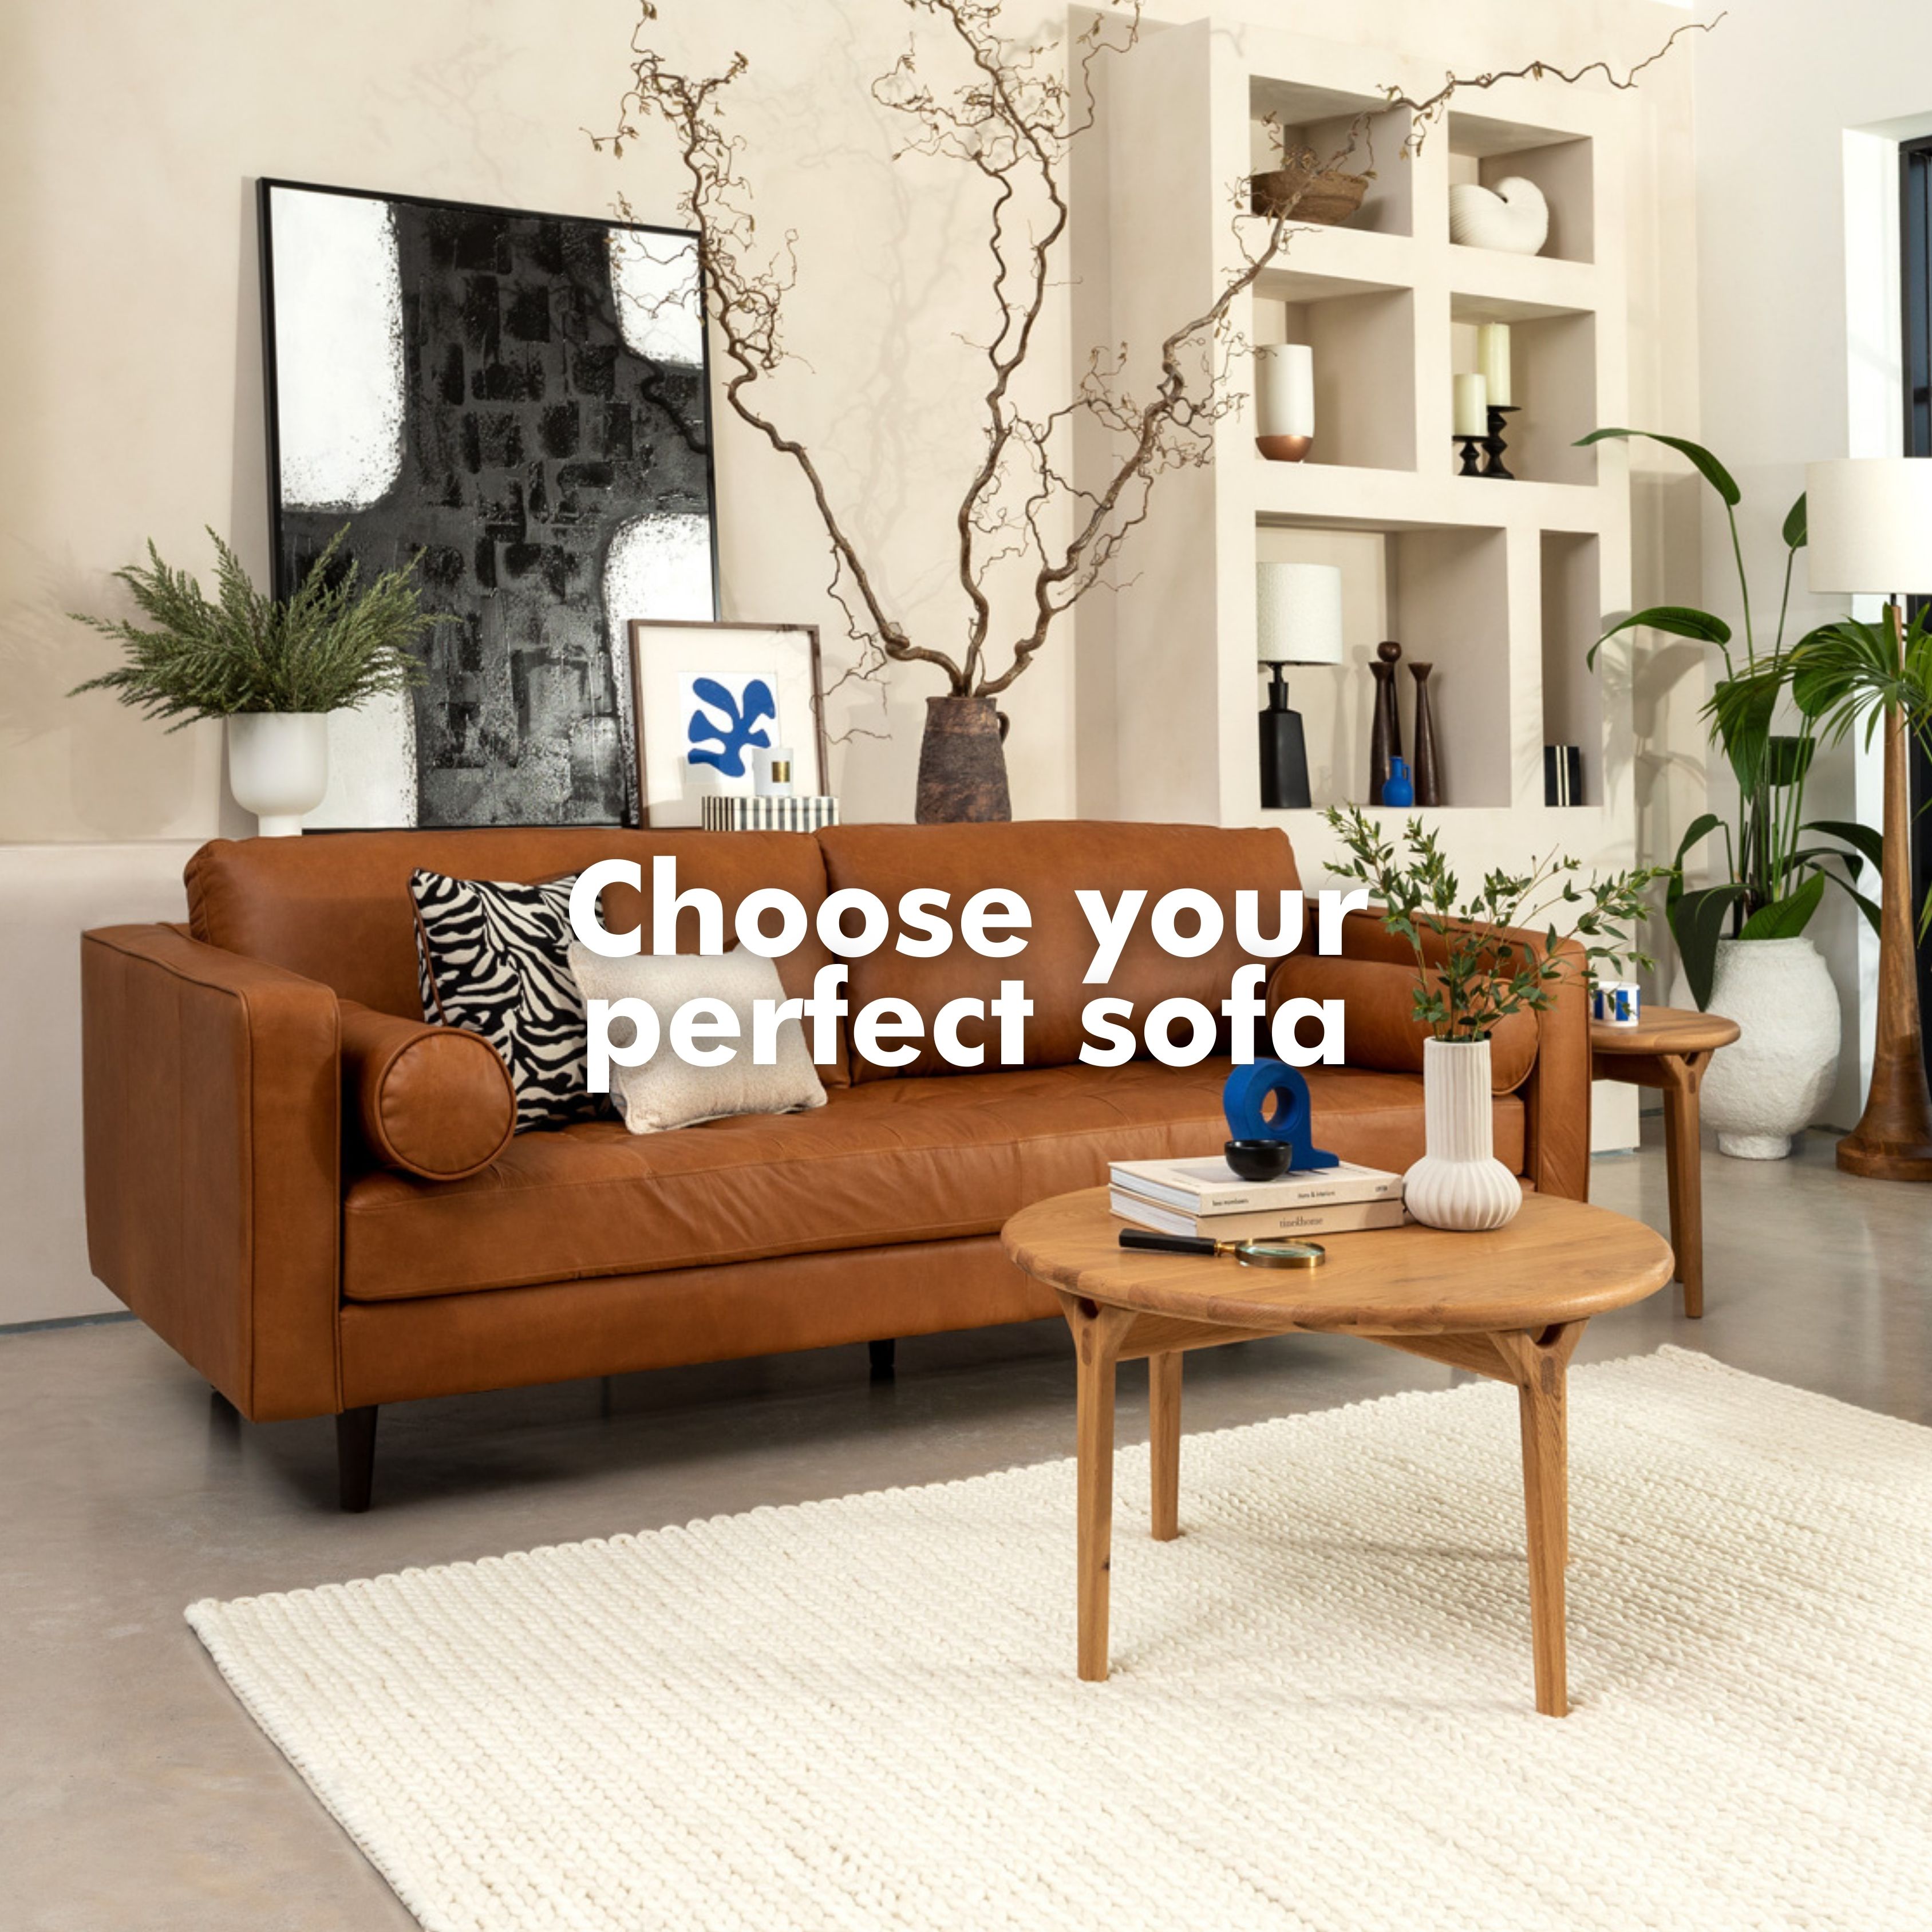 Choose-your-perfect-sofa